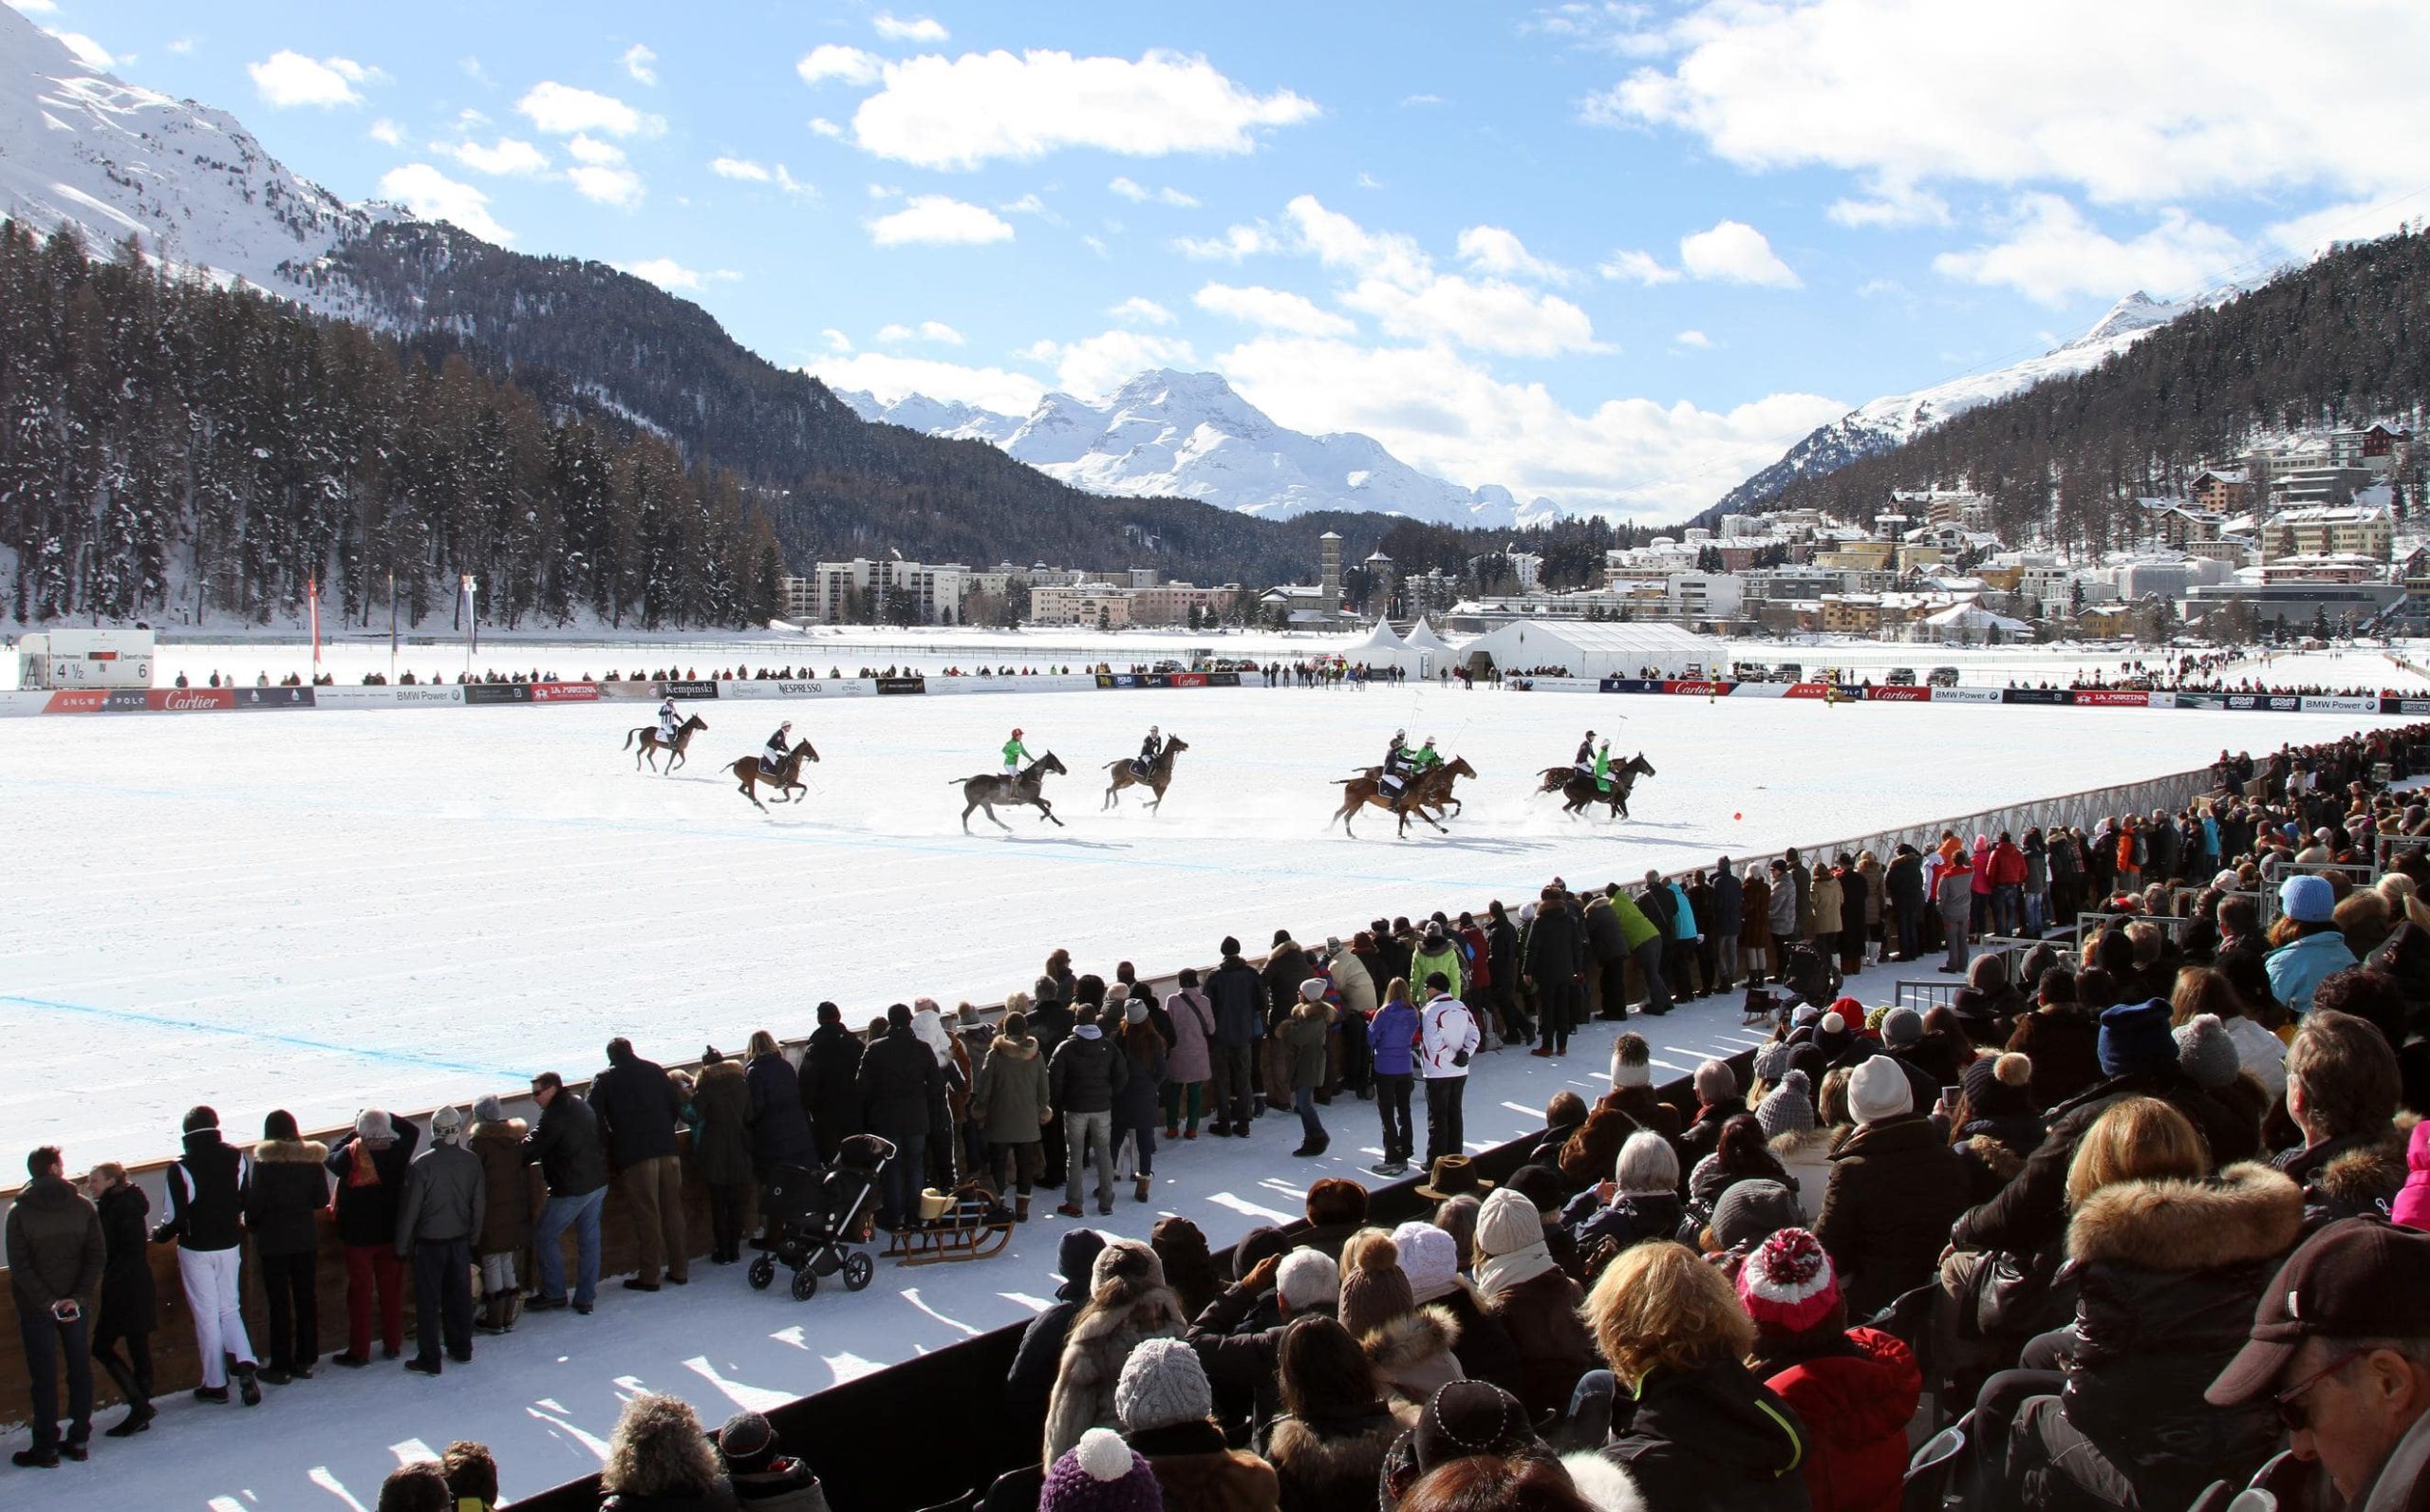 Spectators cheering as polo players compete on a snow-covered field at the Snow Polo World Cup.